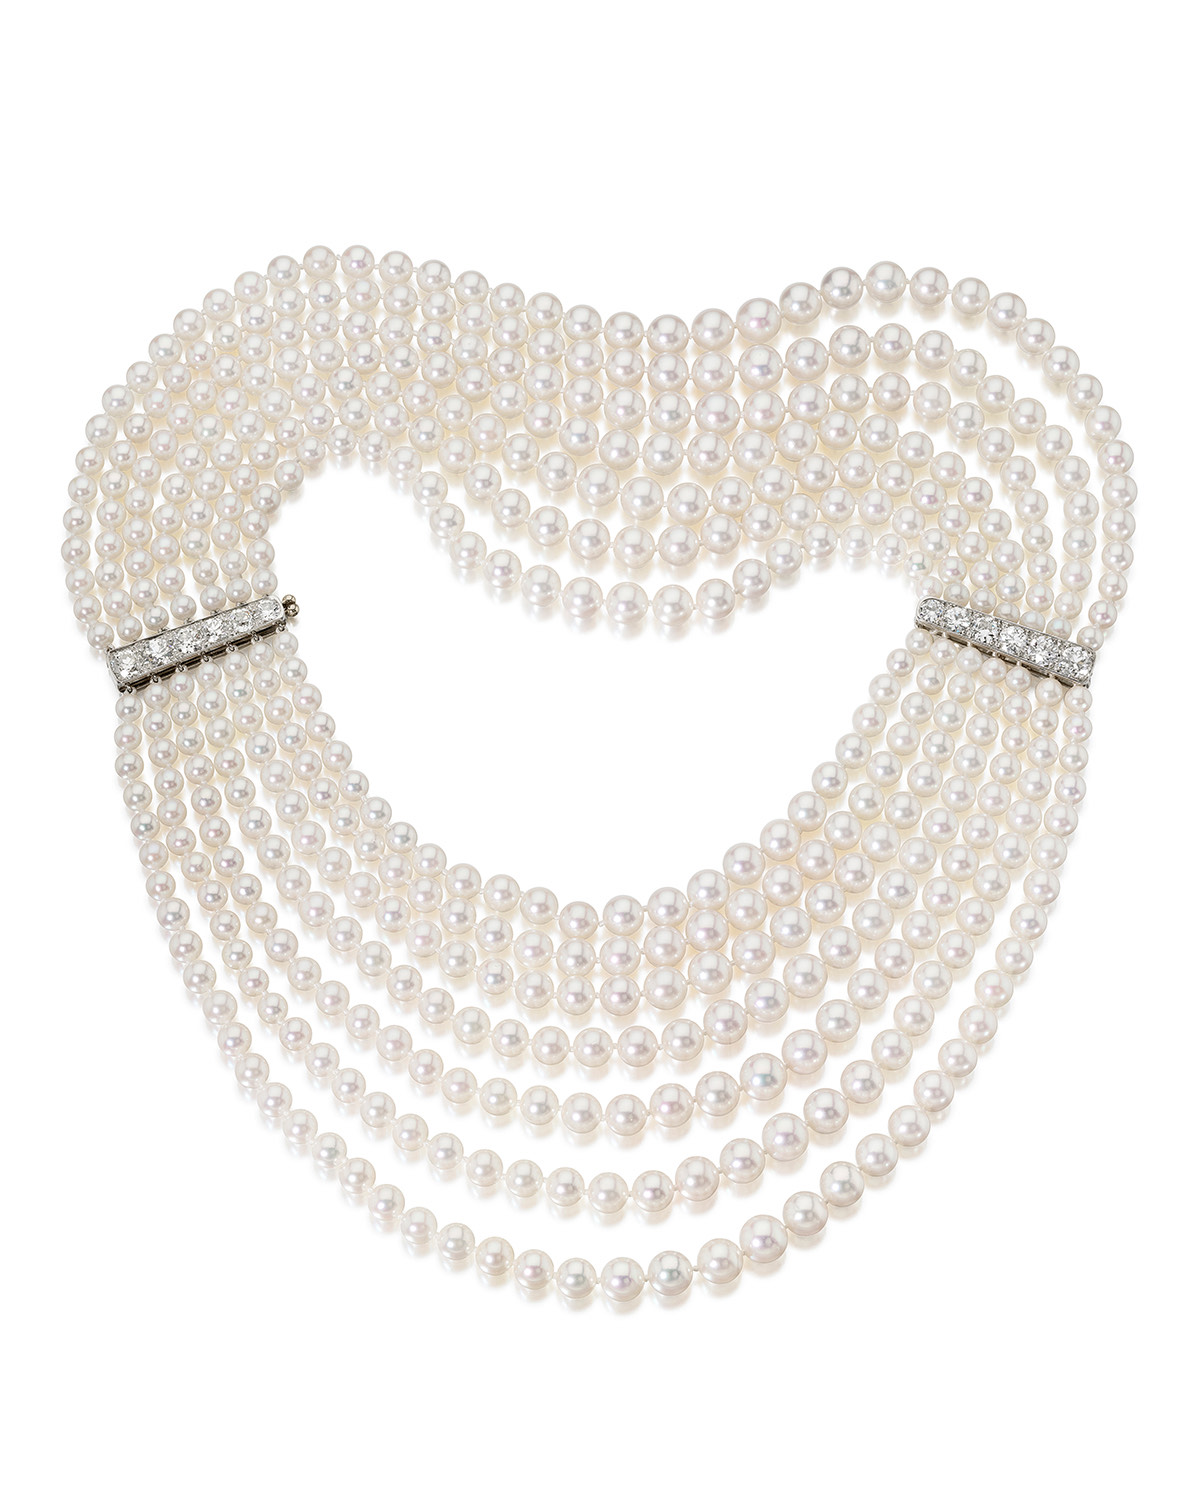 magnificent Akoya Pearl and Aquamarine Collar Necklace can be worn in multiple, flattering ways. 